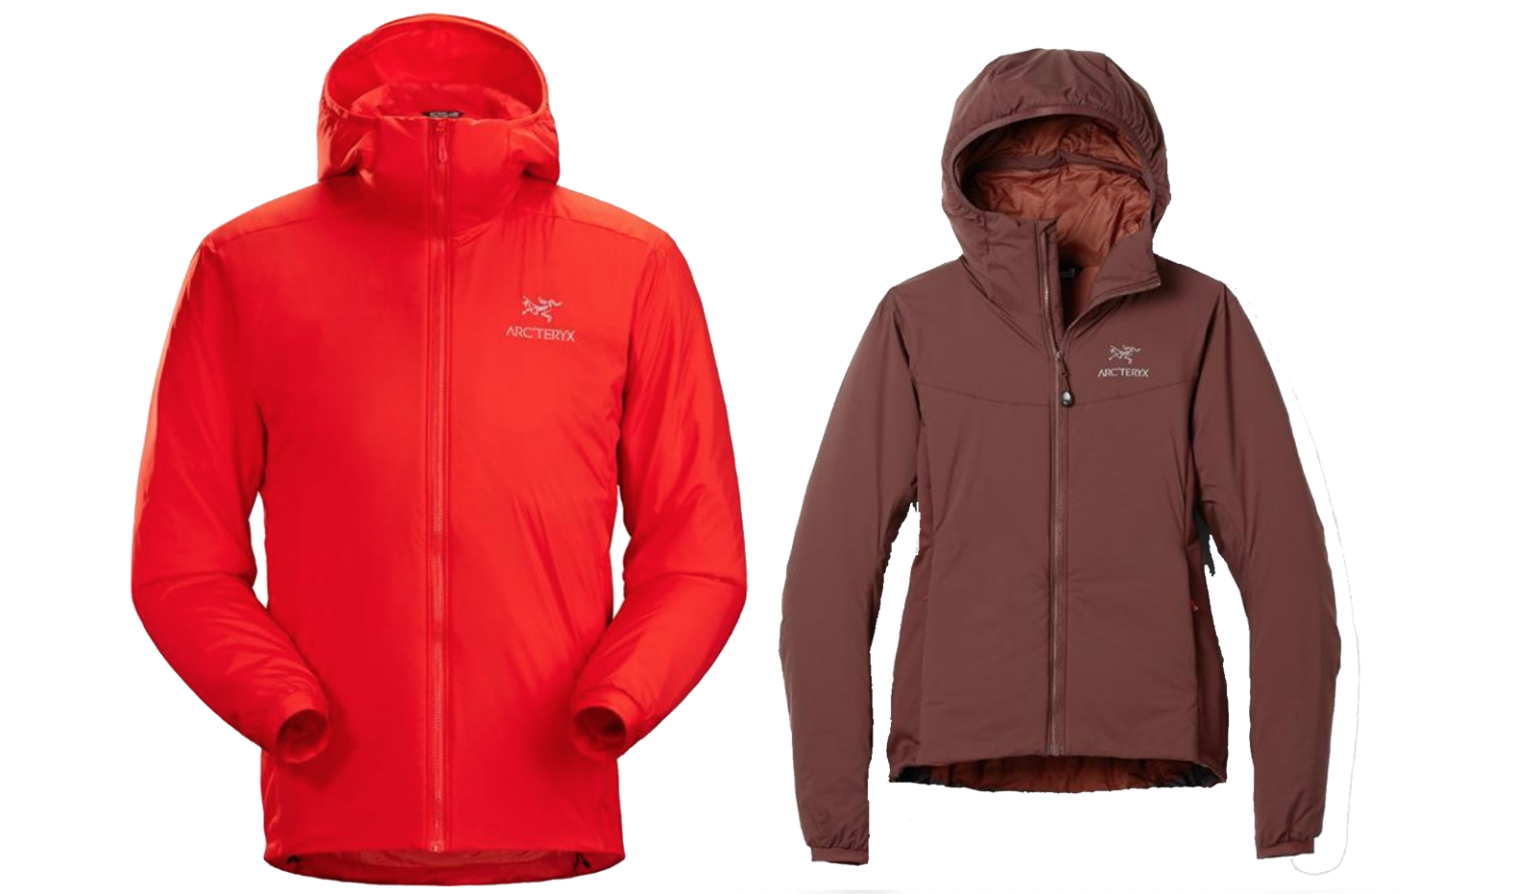 6 Best Mid Layers and Down Jackets of 2022 - Wildland Gear Guide